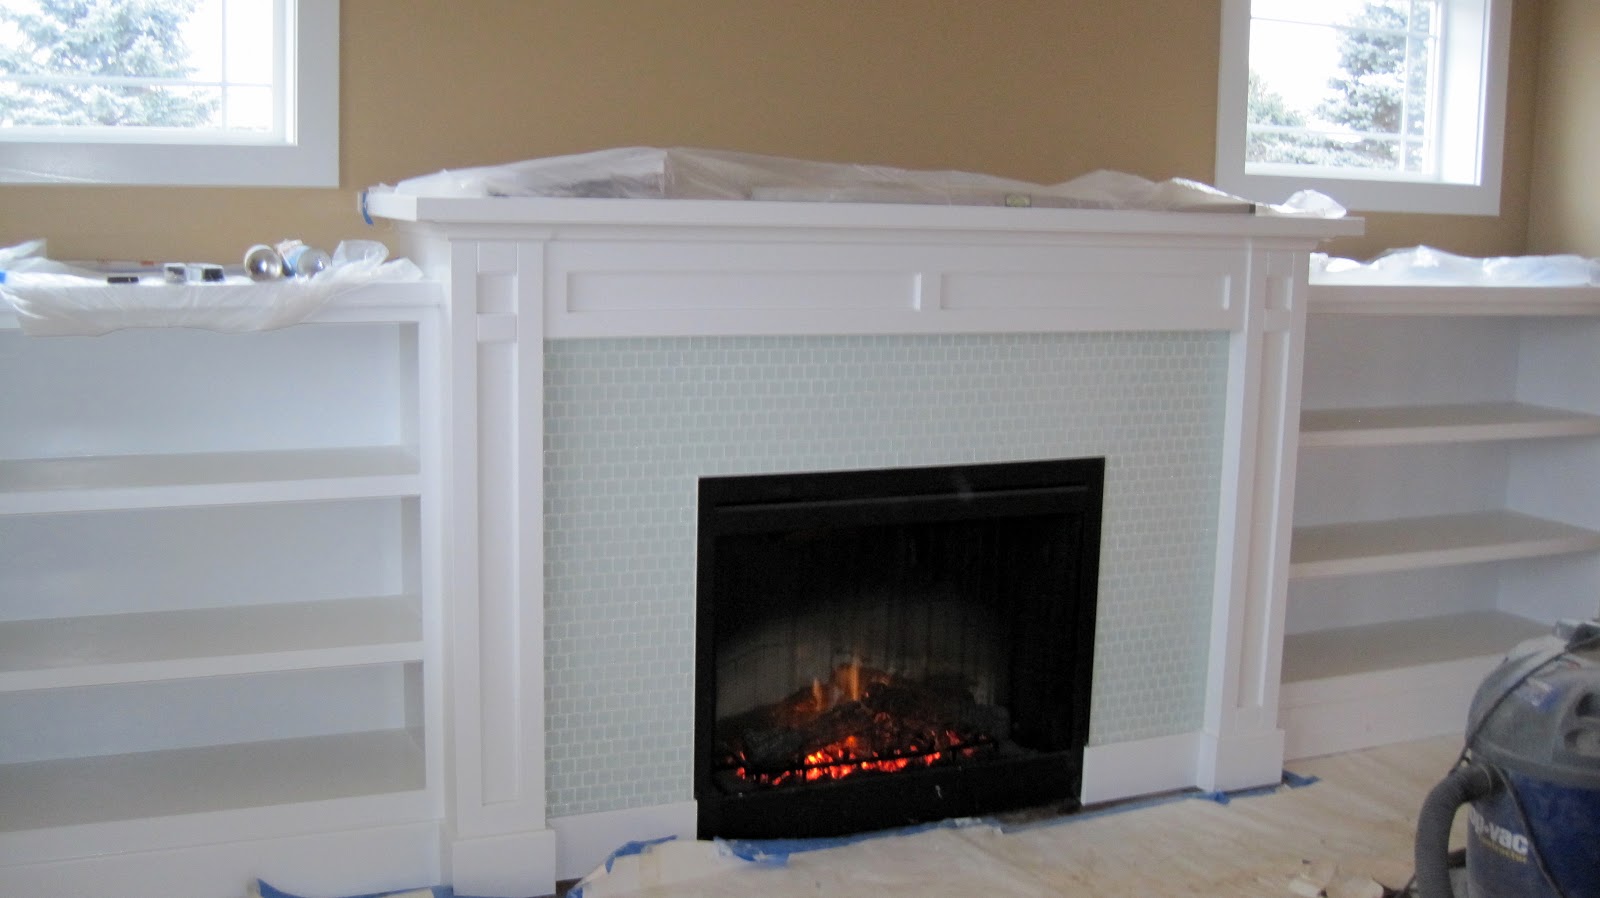 Built in shelves around fireplace Next to the white trim.